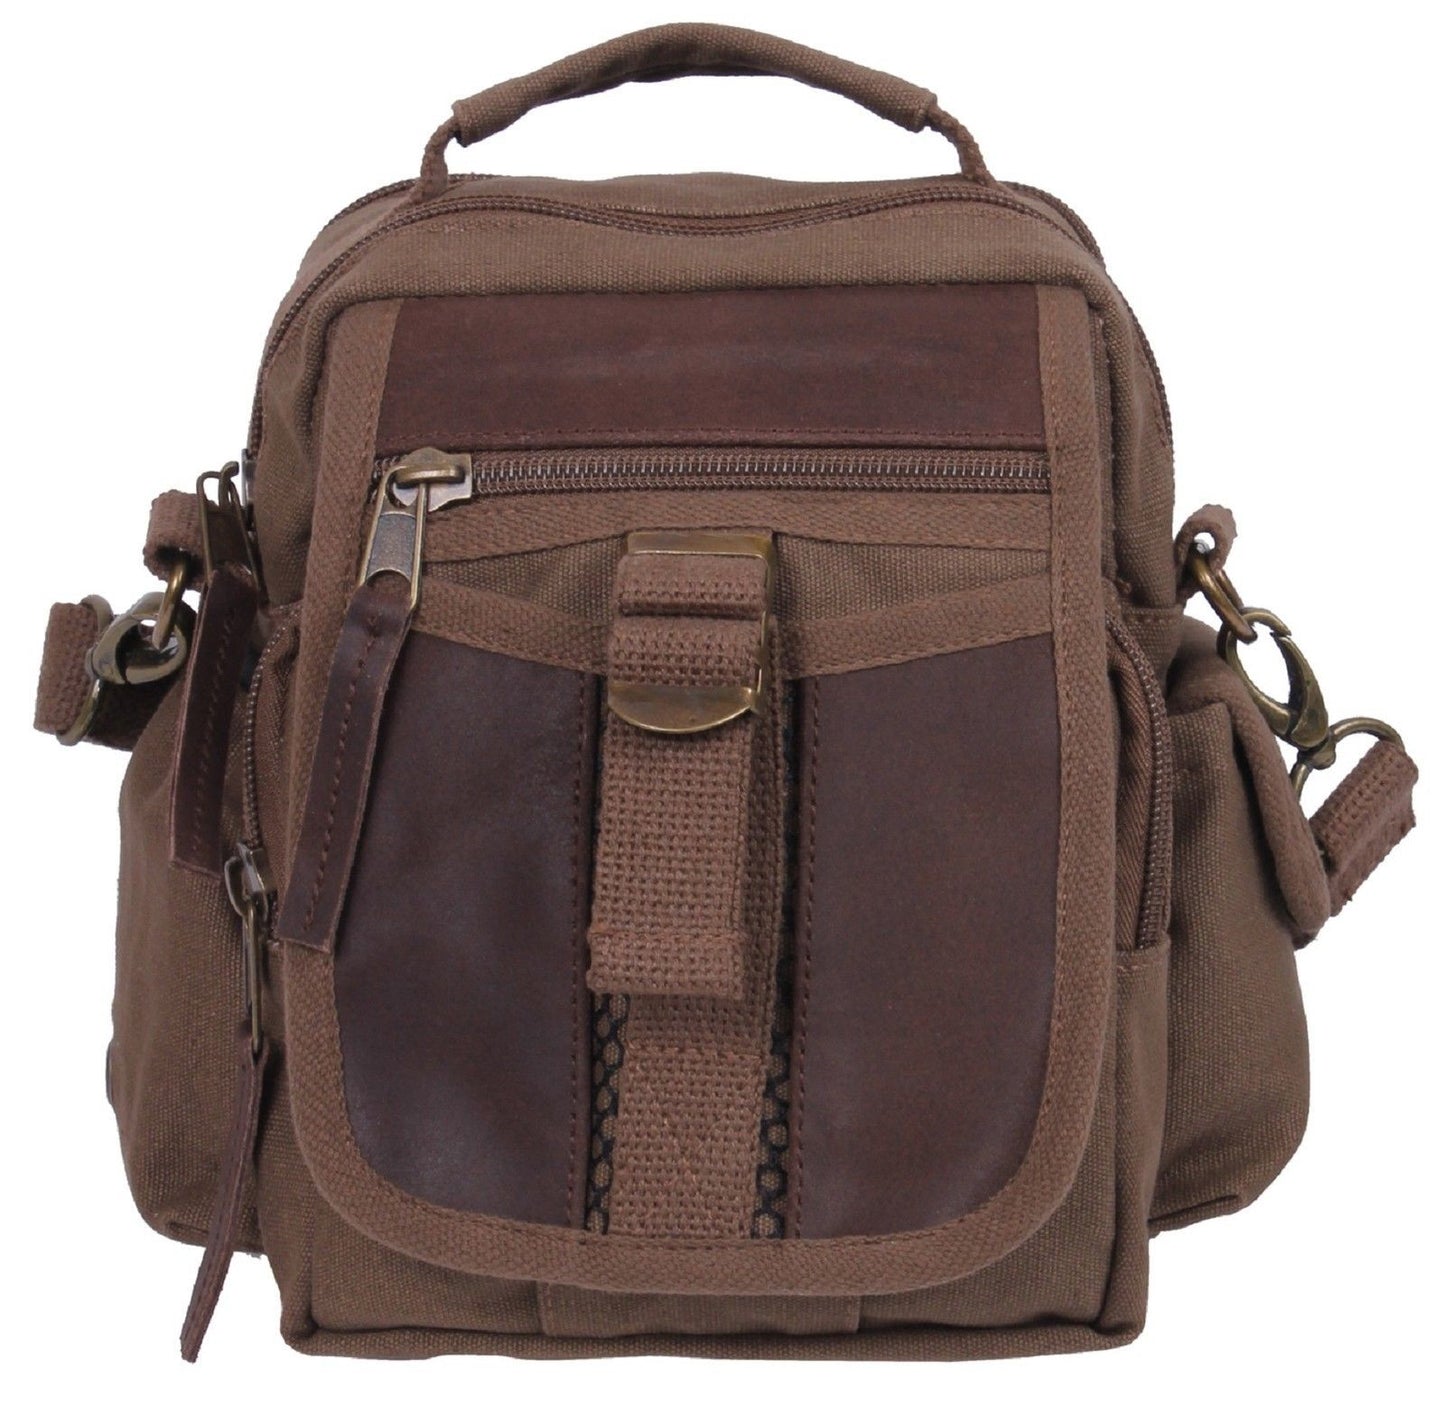 Brown Leather and Canvas Compact Travel Bag - Rothco 8" Tourist Shoulder Bags